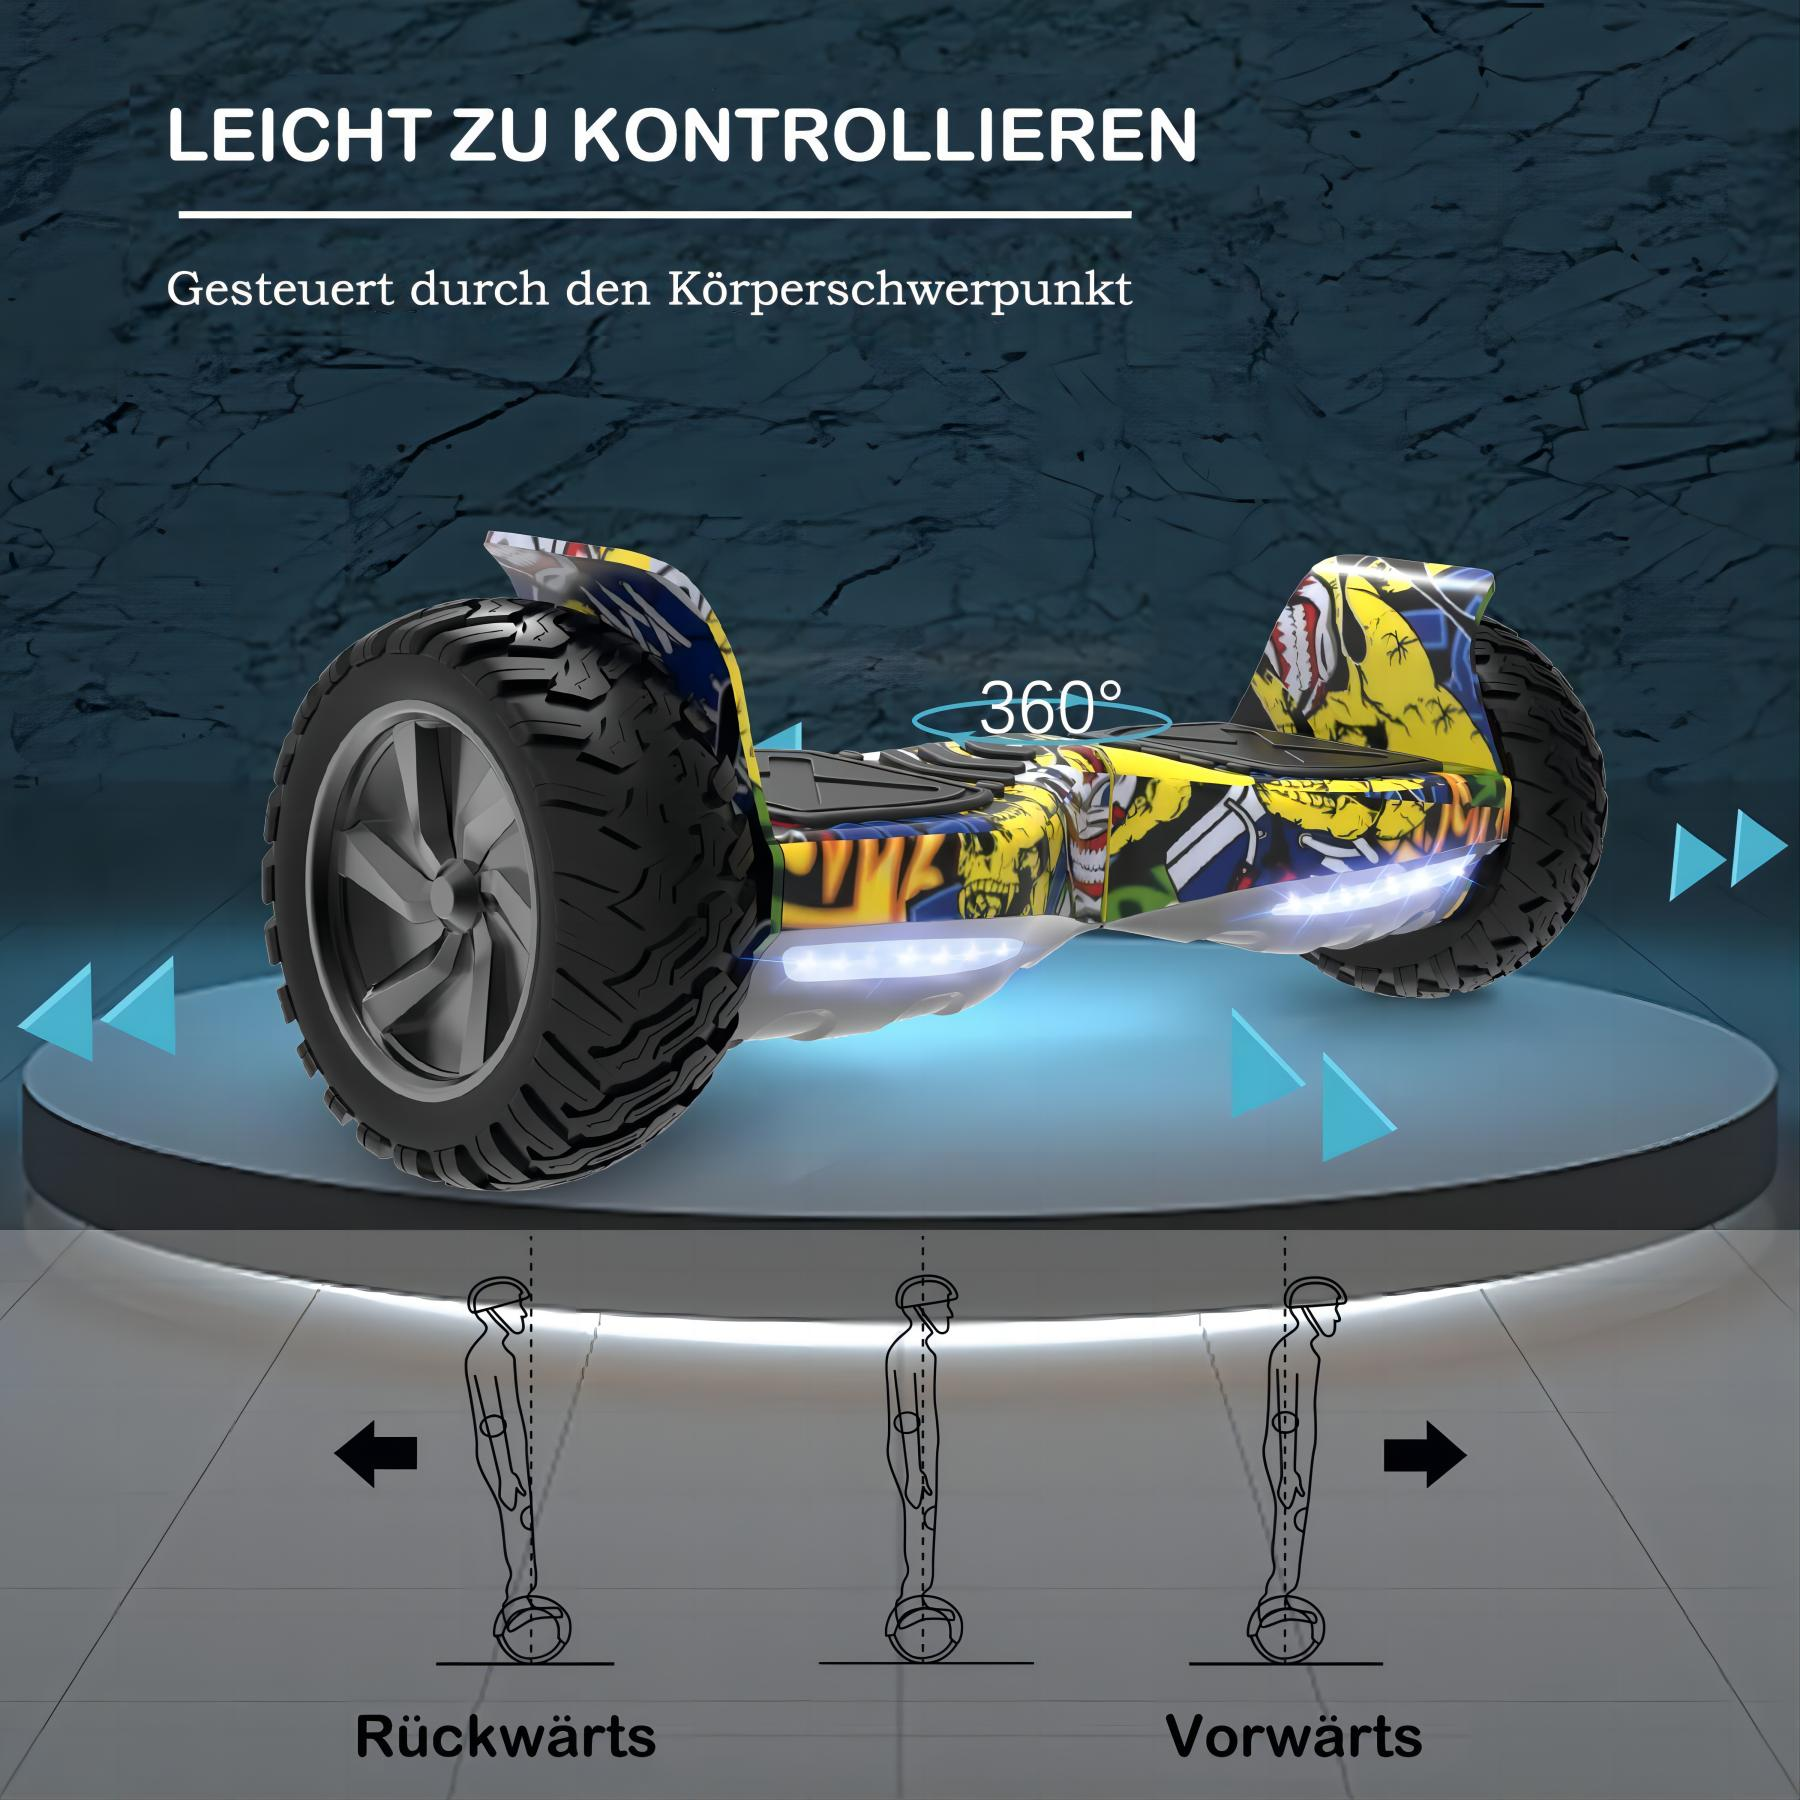 Board Hippop) RCB APP HM2 Balance SUV-Hoverboard mit Zoll, (8,5